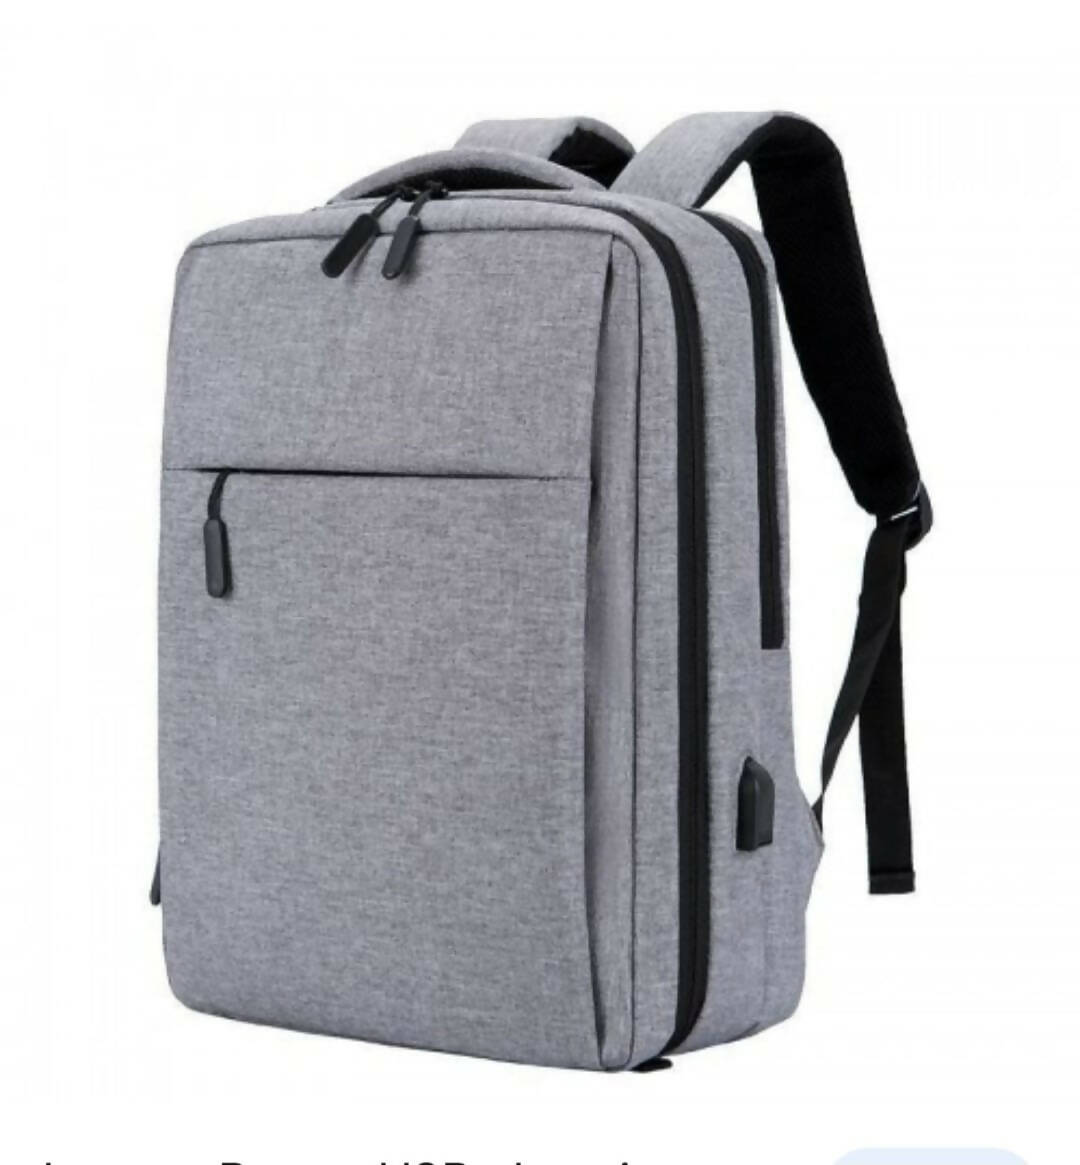 Laptop Bag with USB Connectivity specifically well designed for to 14-17-Inch